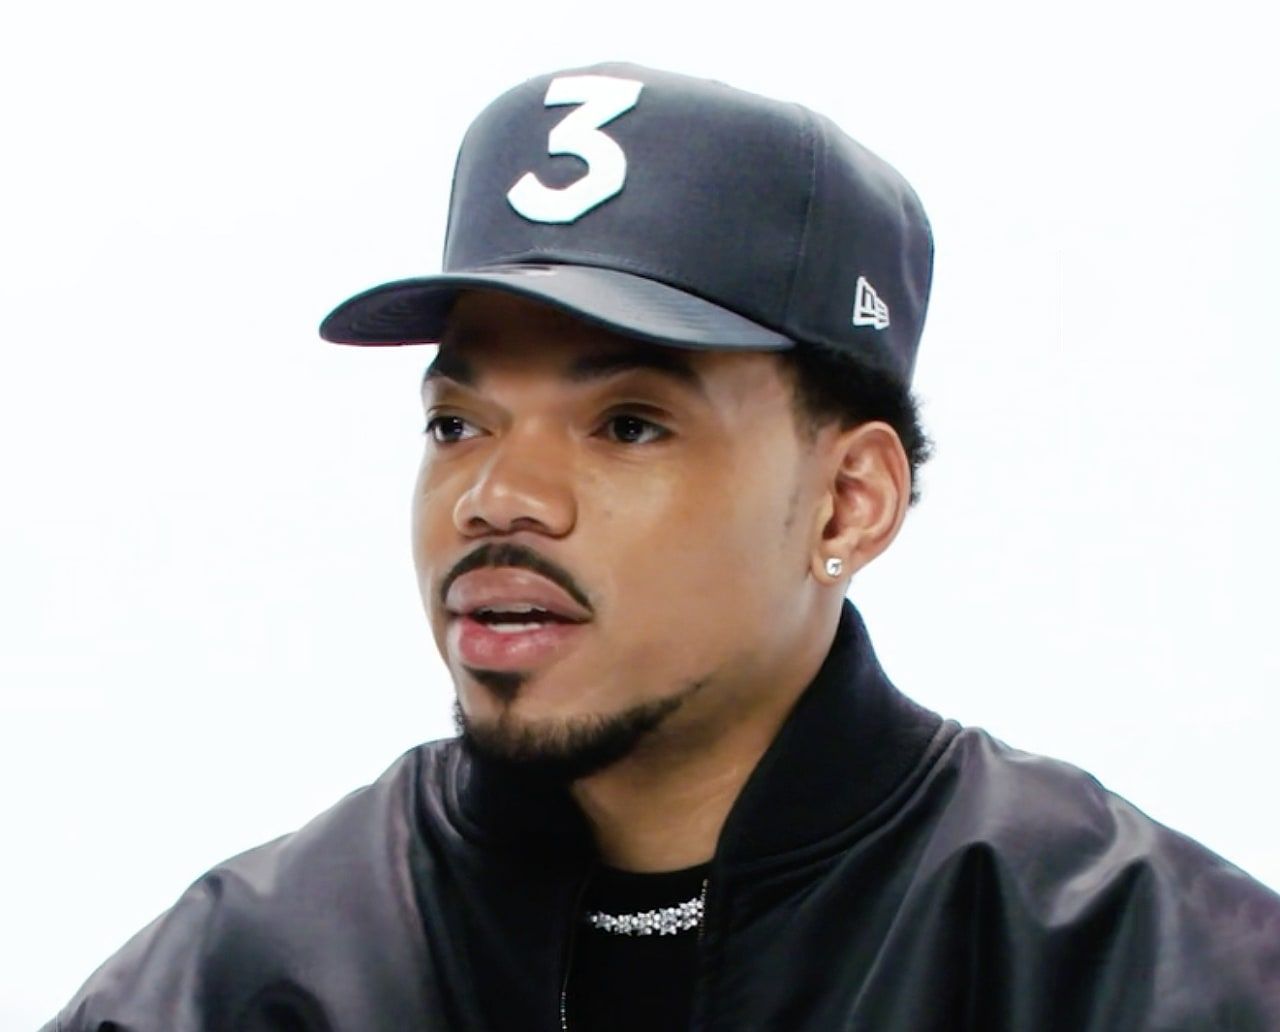 Chance the Rapper wearing a hat and looking into the camera. - Chance the Rapper